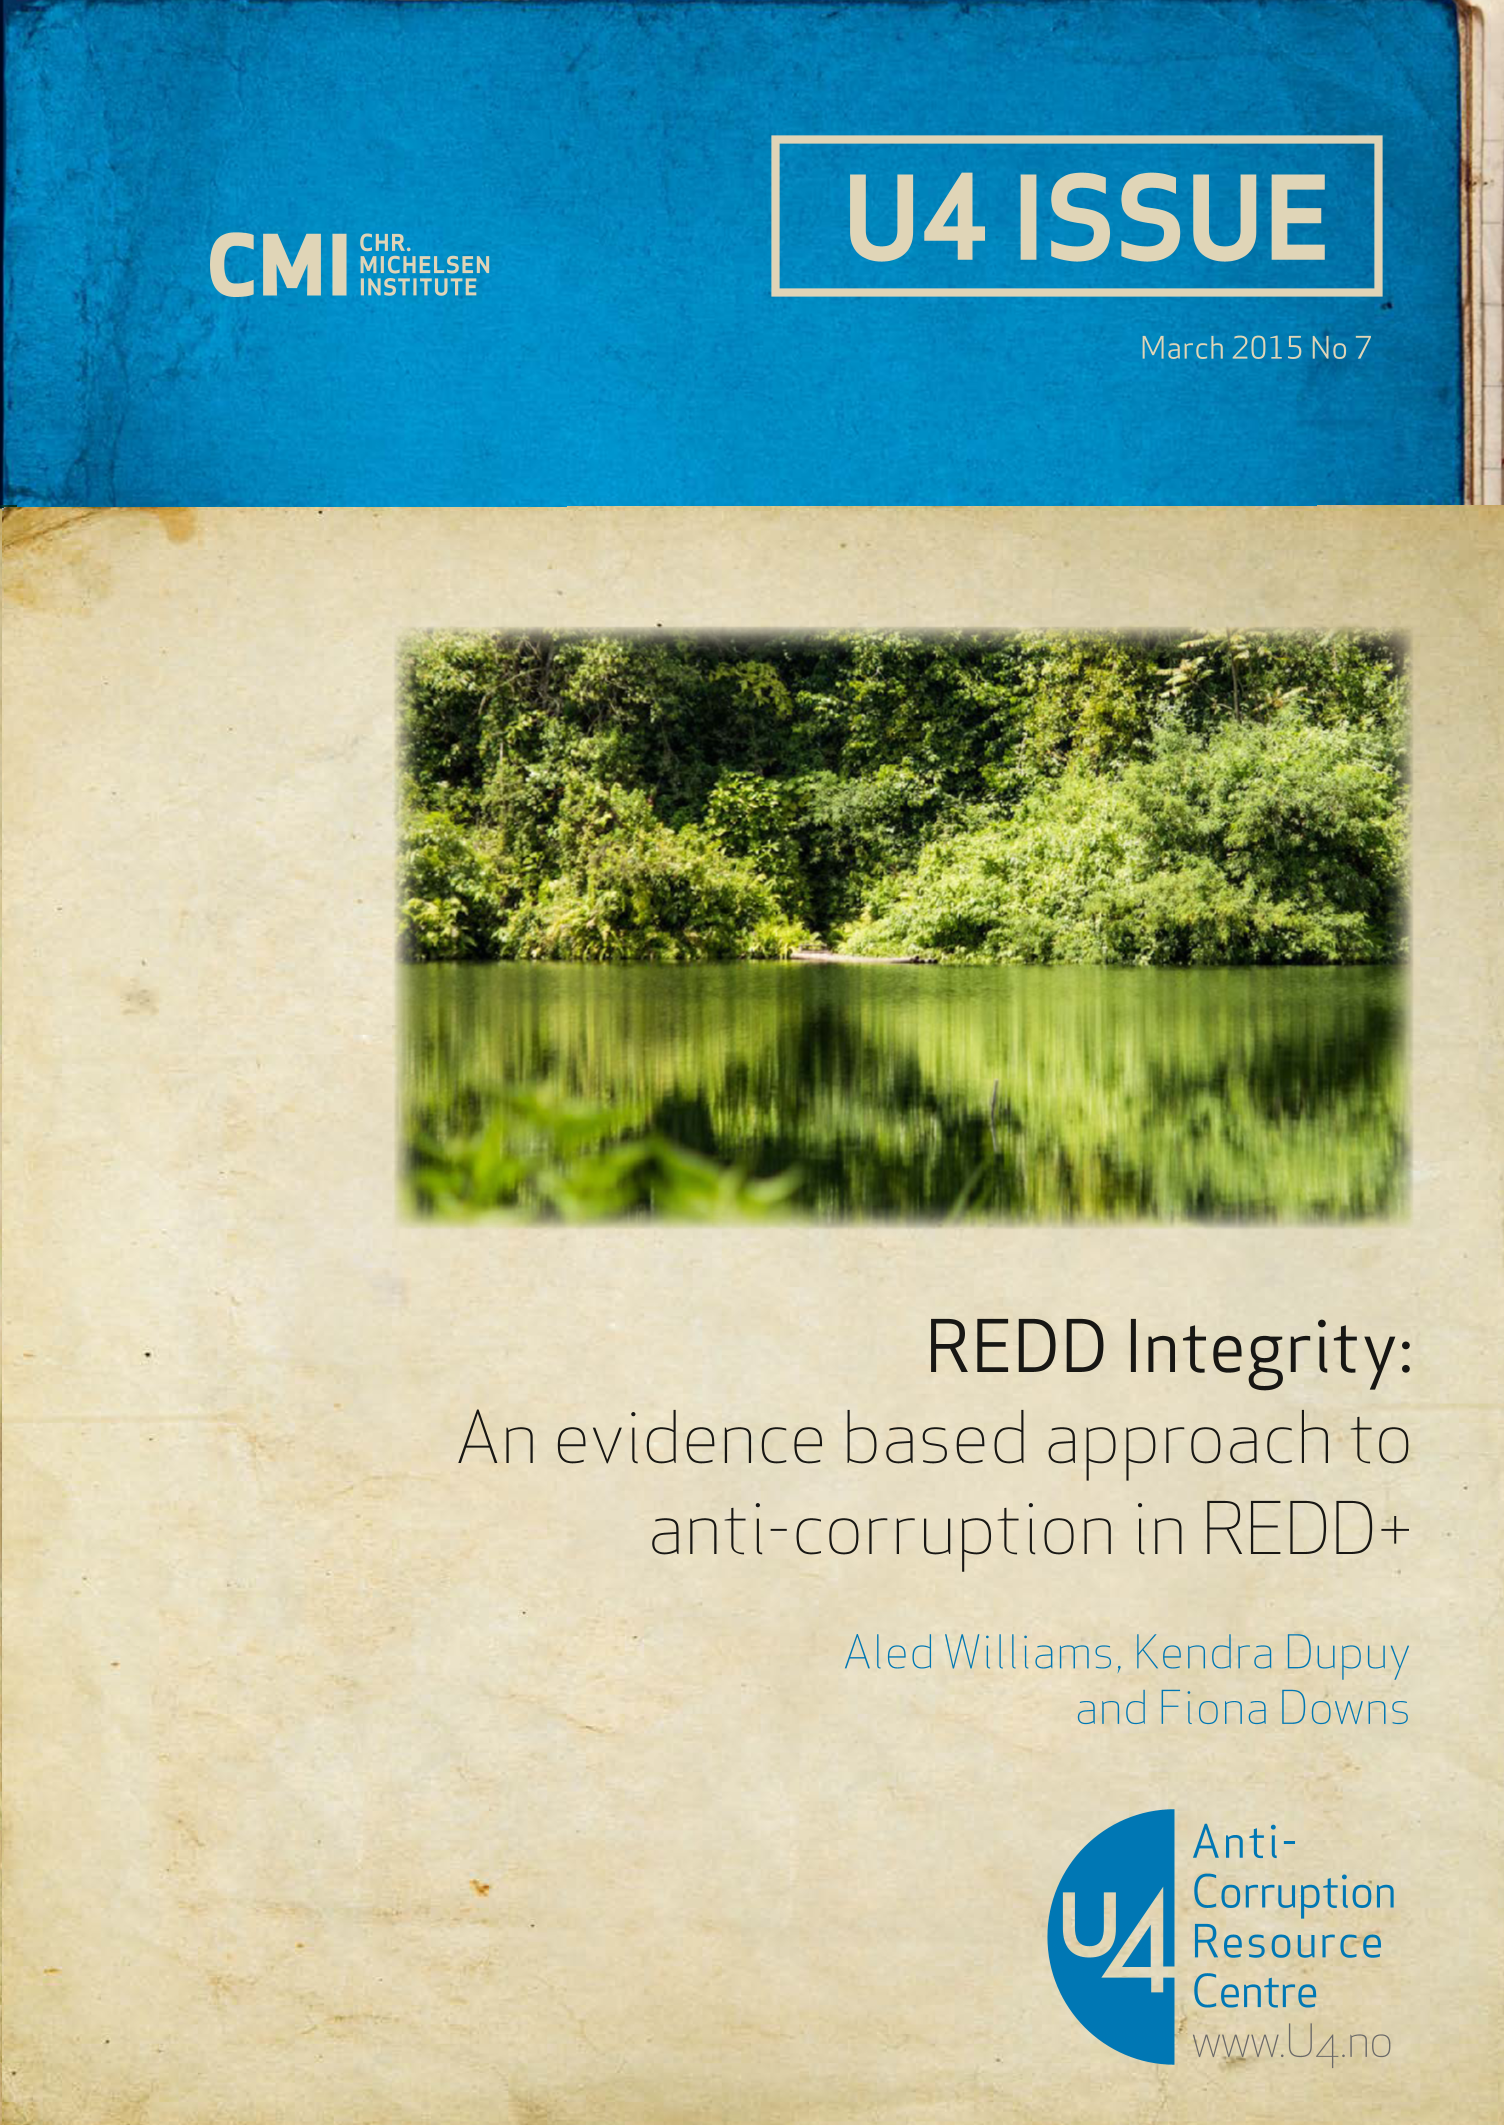 REDD Integrity: An evidence based approach to anti-corruption in REDD+